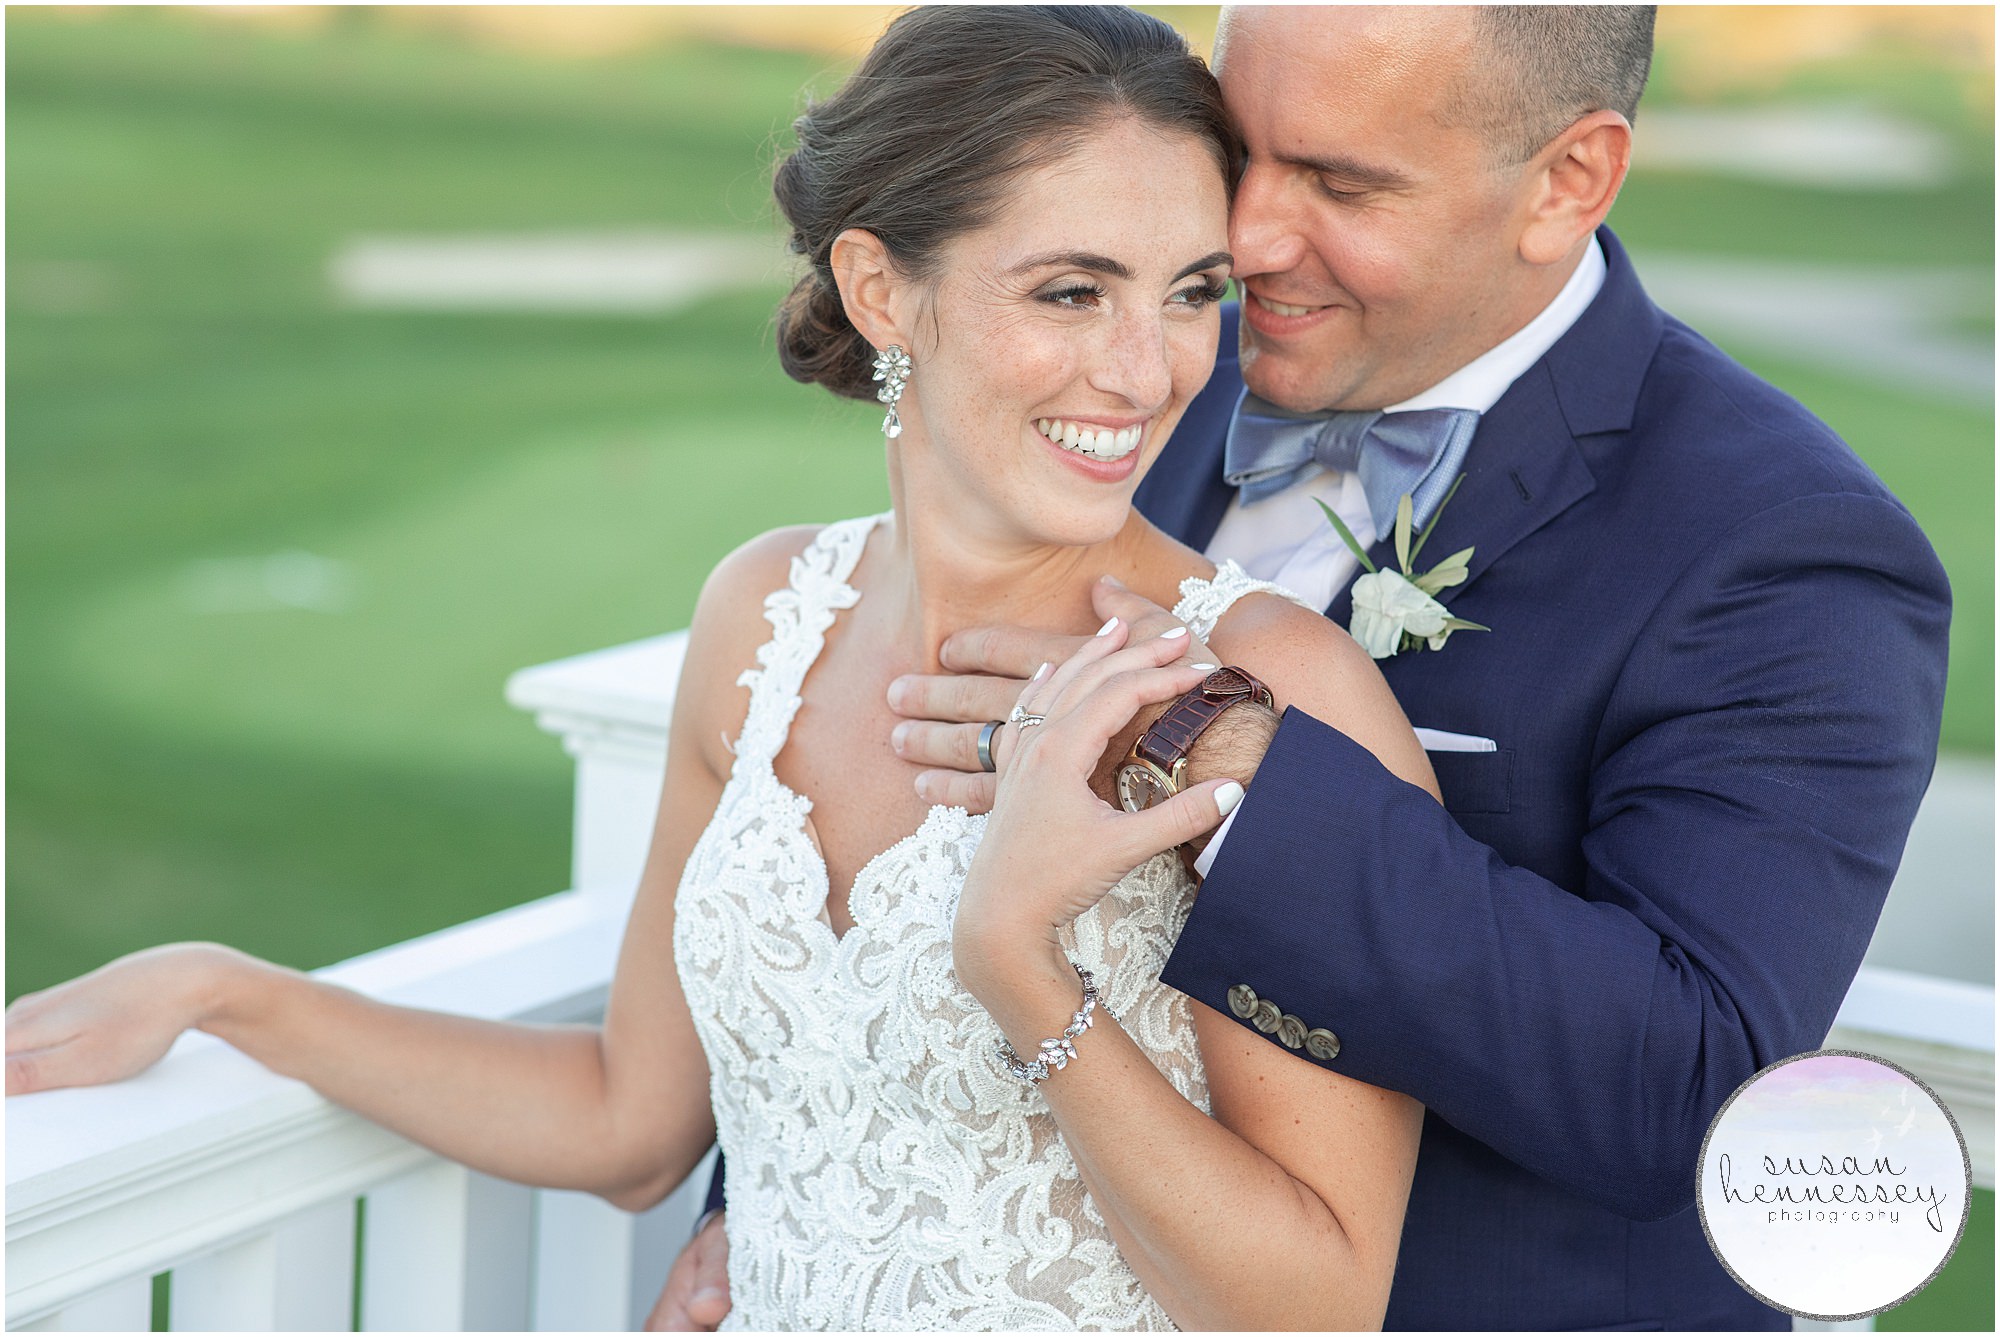 Romantic portraits of bride and groom at Atlantic City Country Club